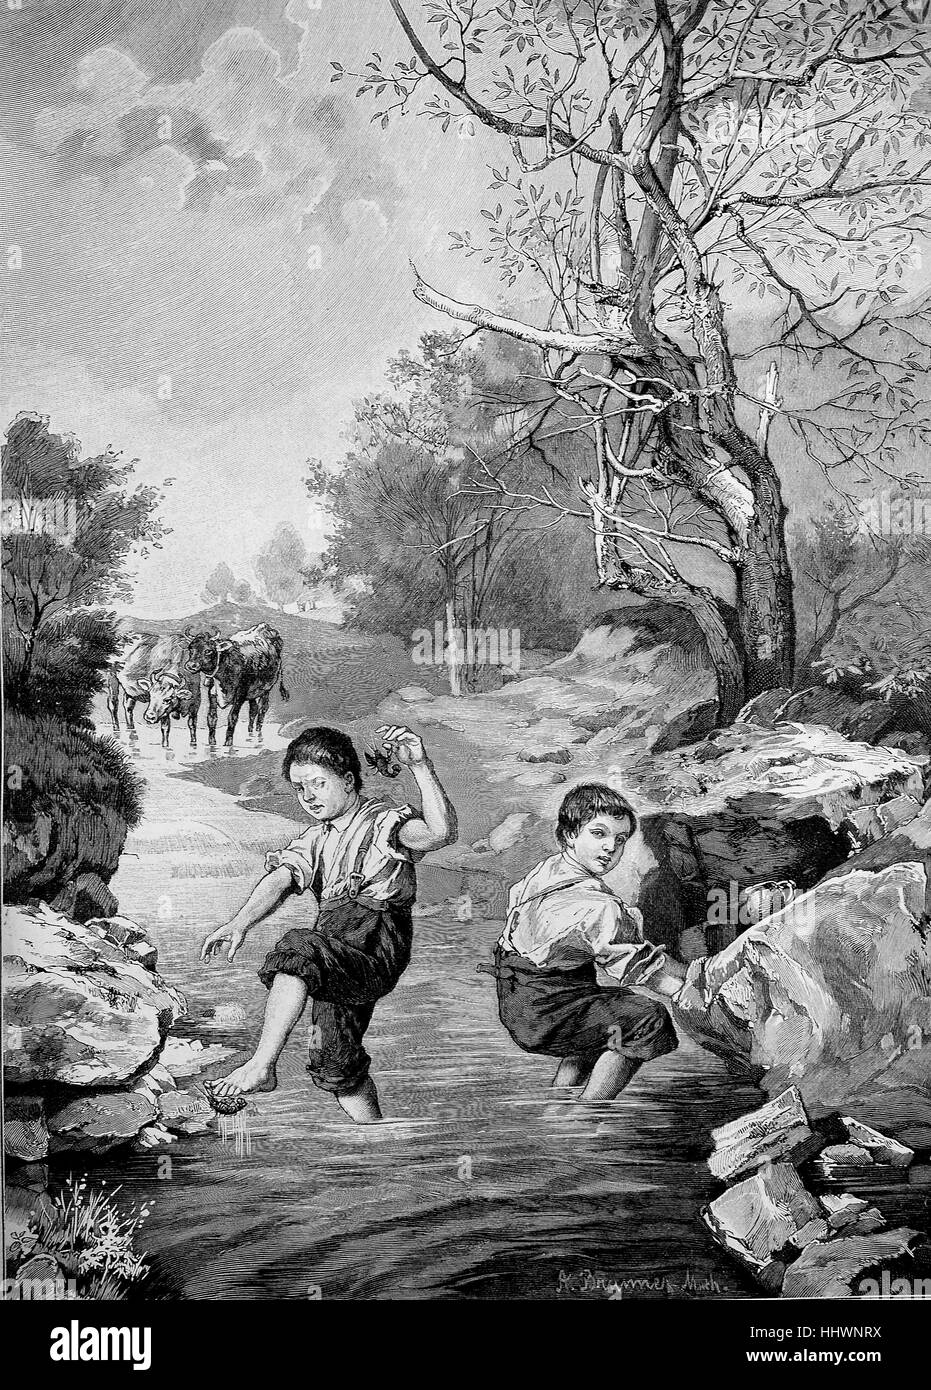 Grosses Pech, Big bad luck, little boy has a river cancer at the foot, Germany, historical image or illustration, published 1890, digital improved Stock Photo